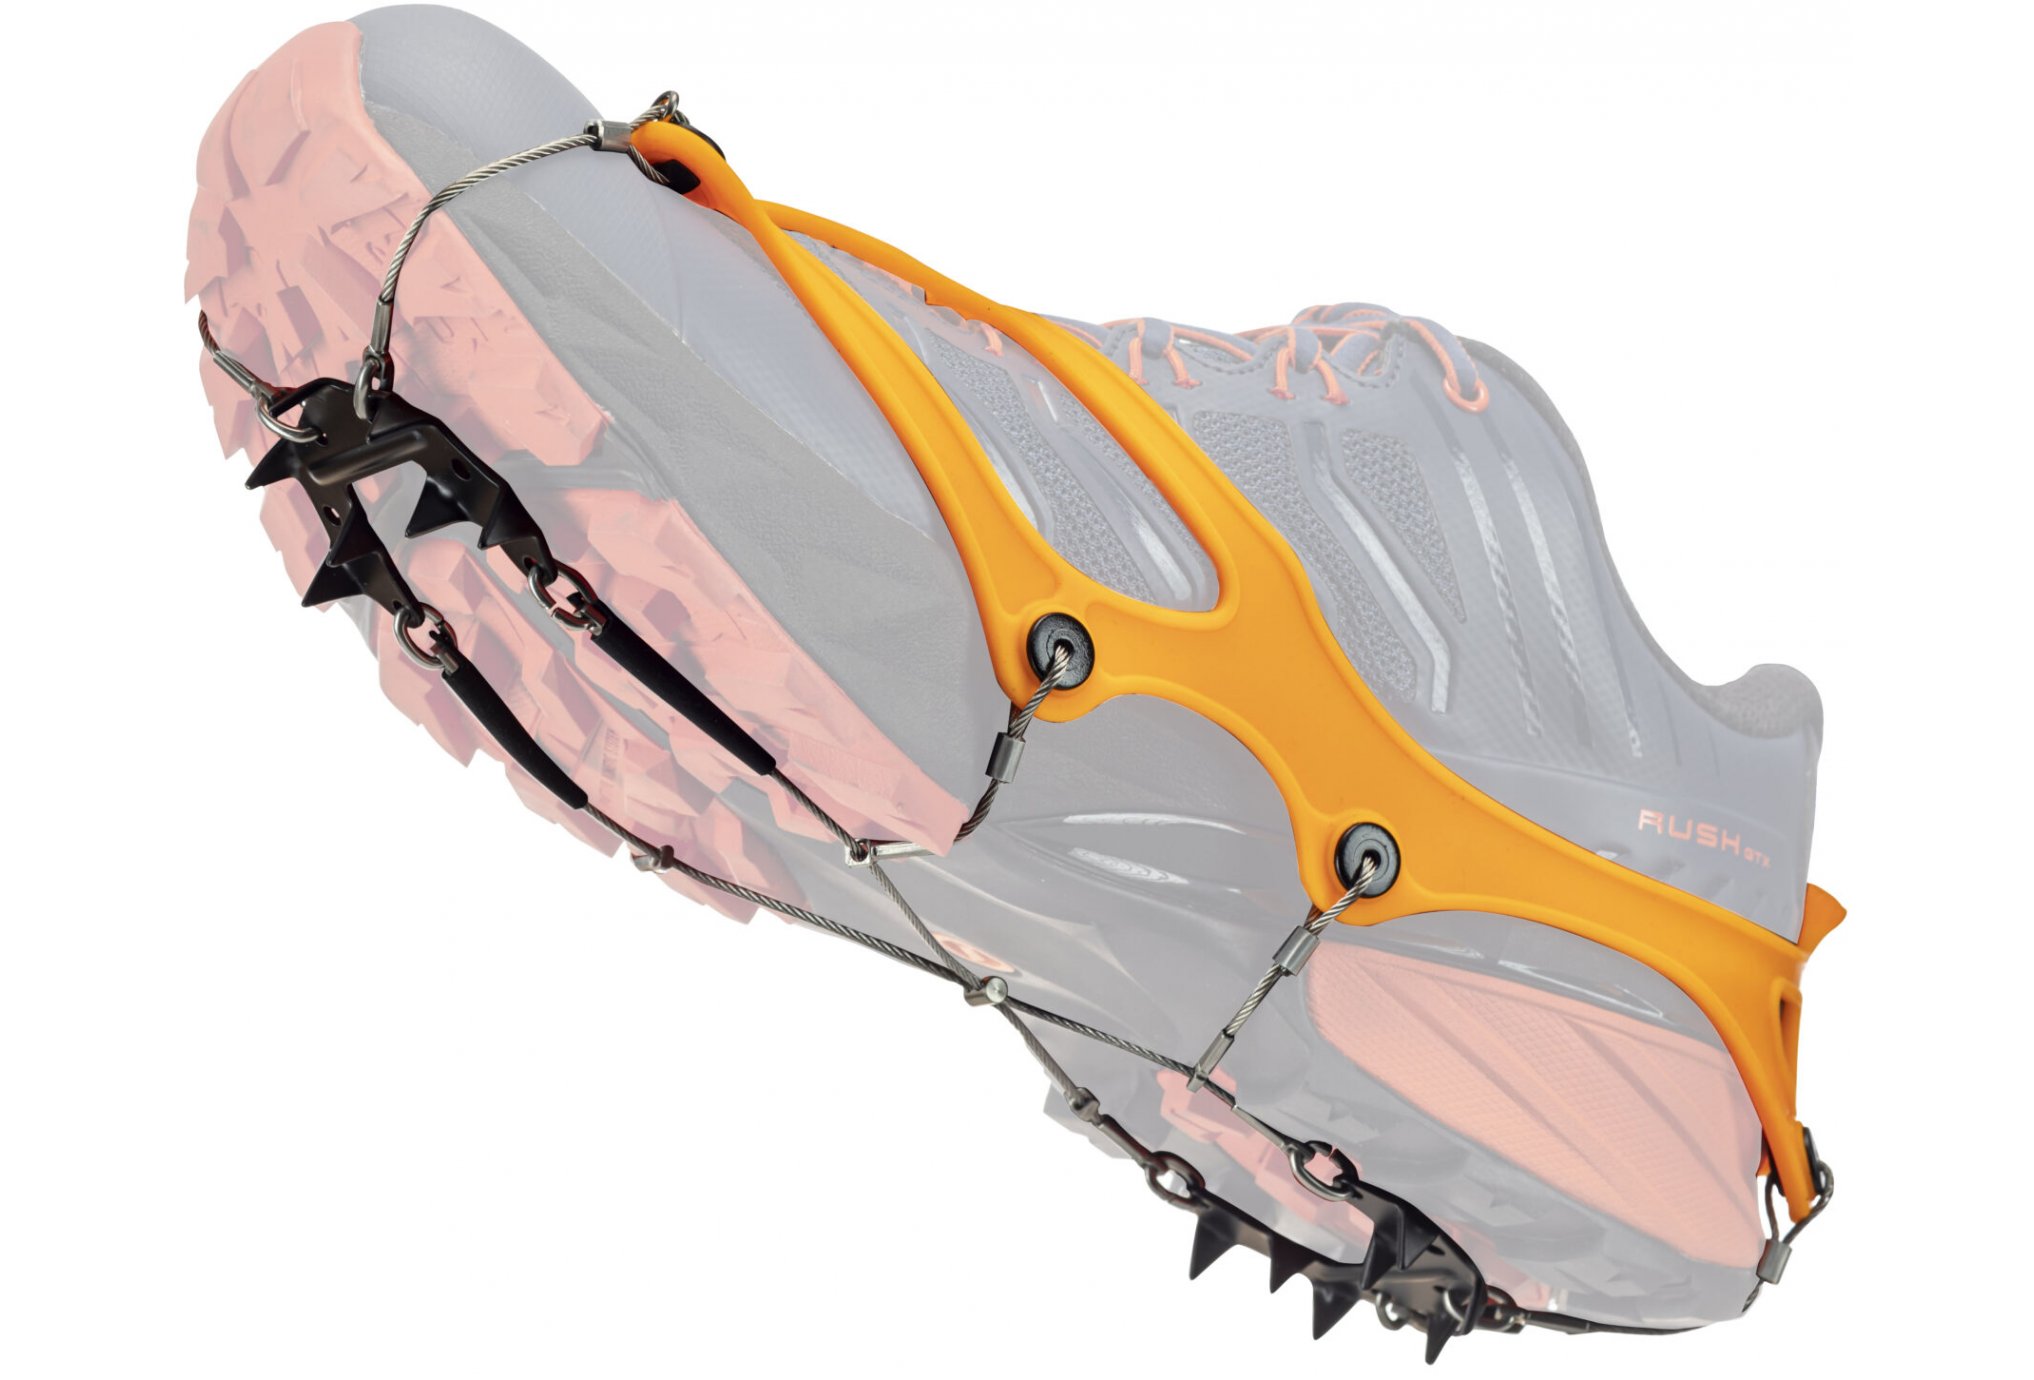 Crampons trail neige – Fit Super-Humain